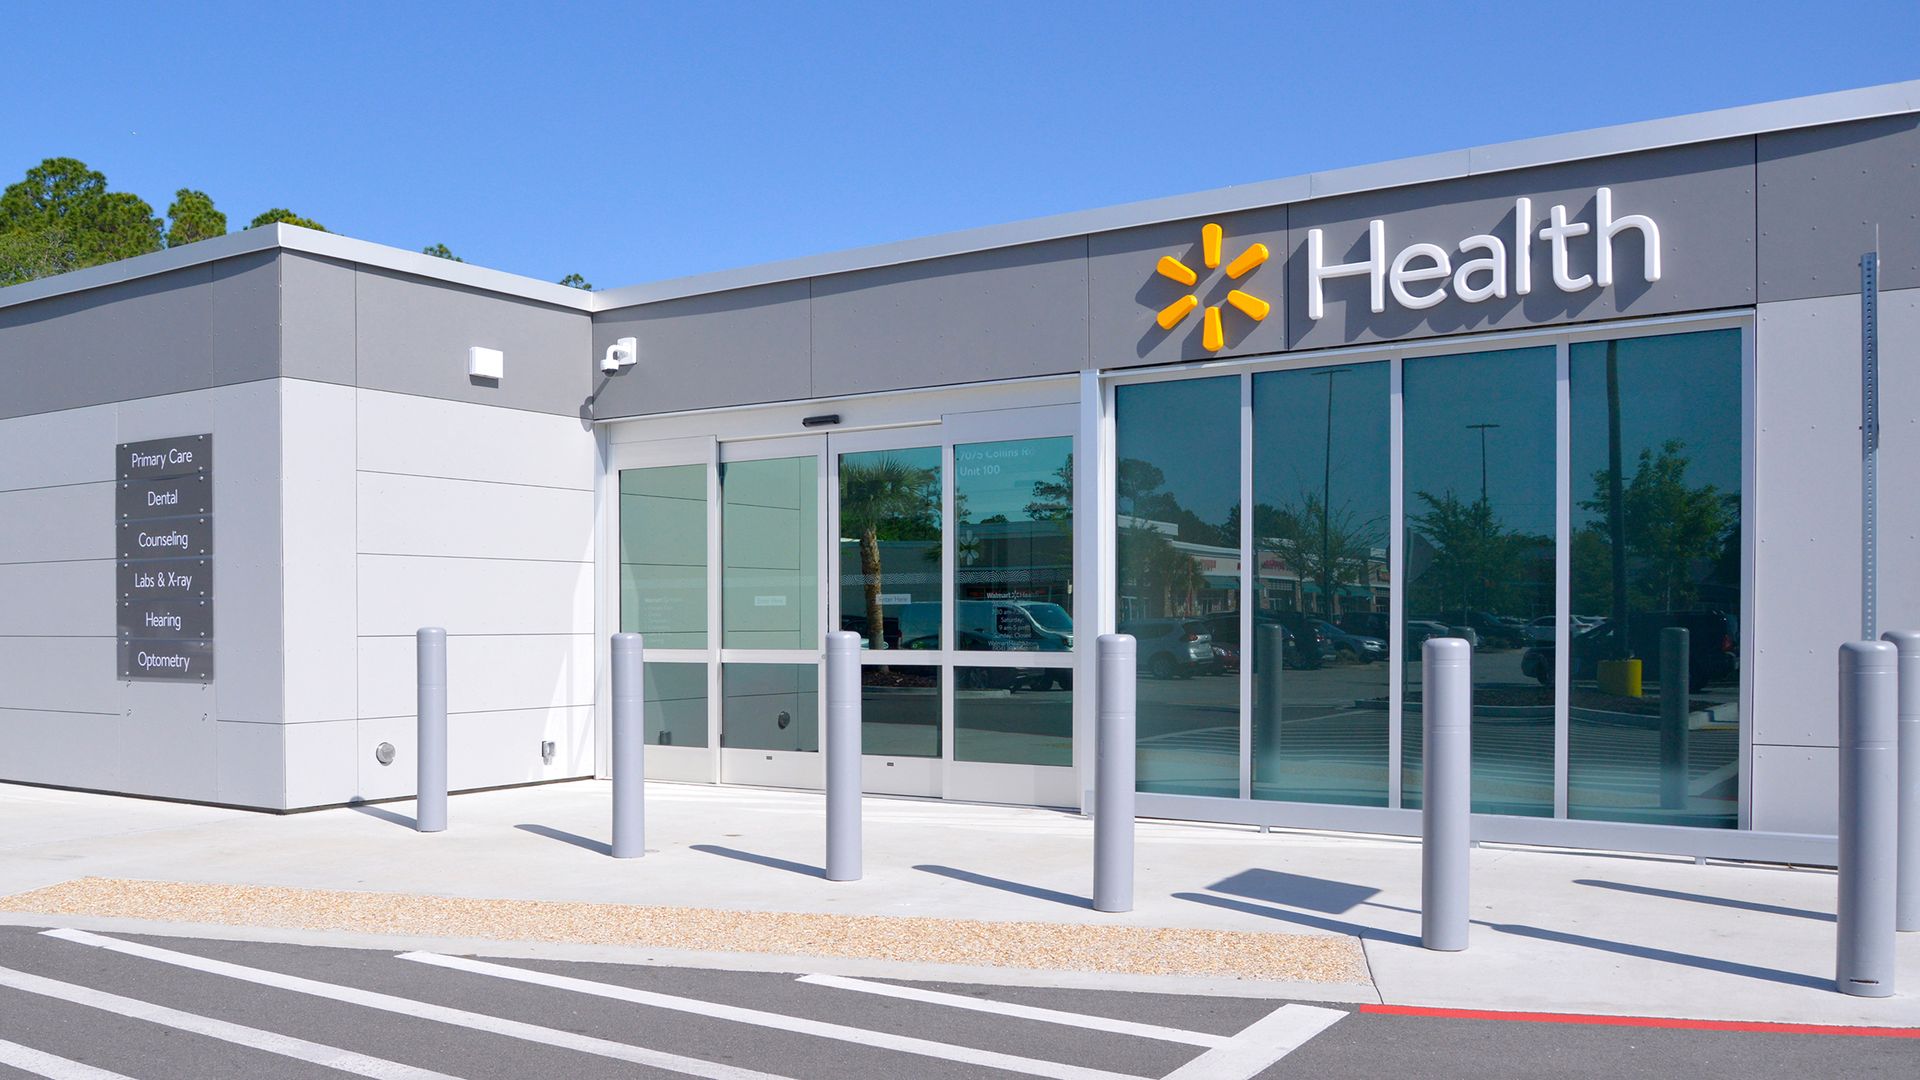 Walmart Health from the outside.